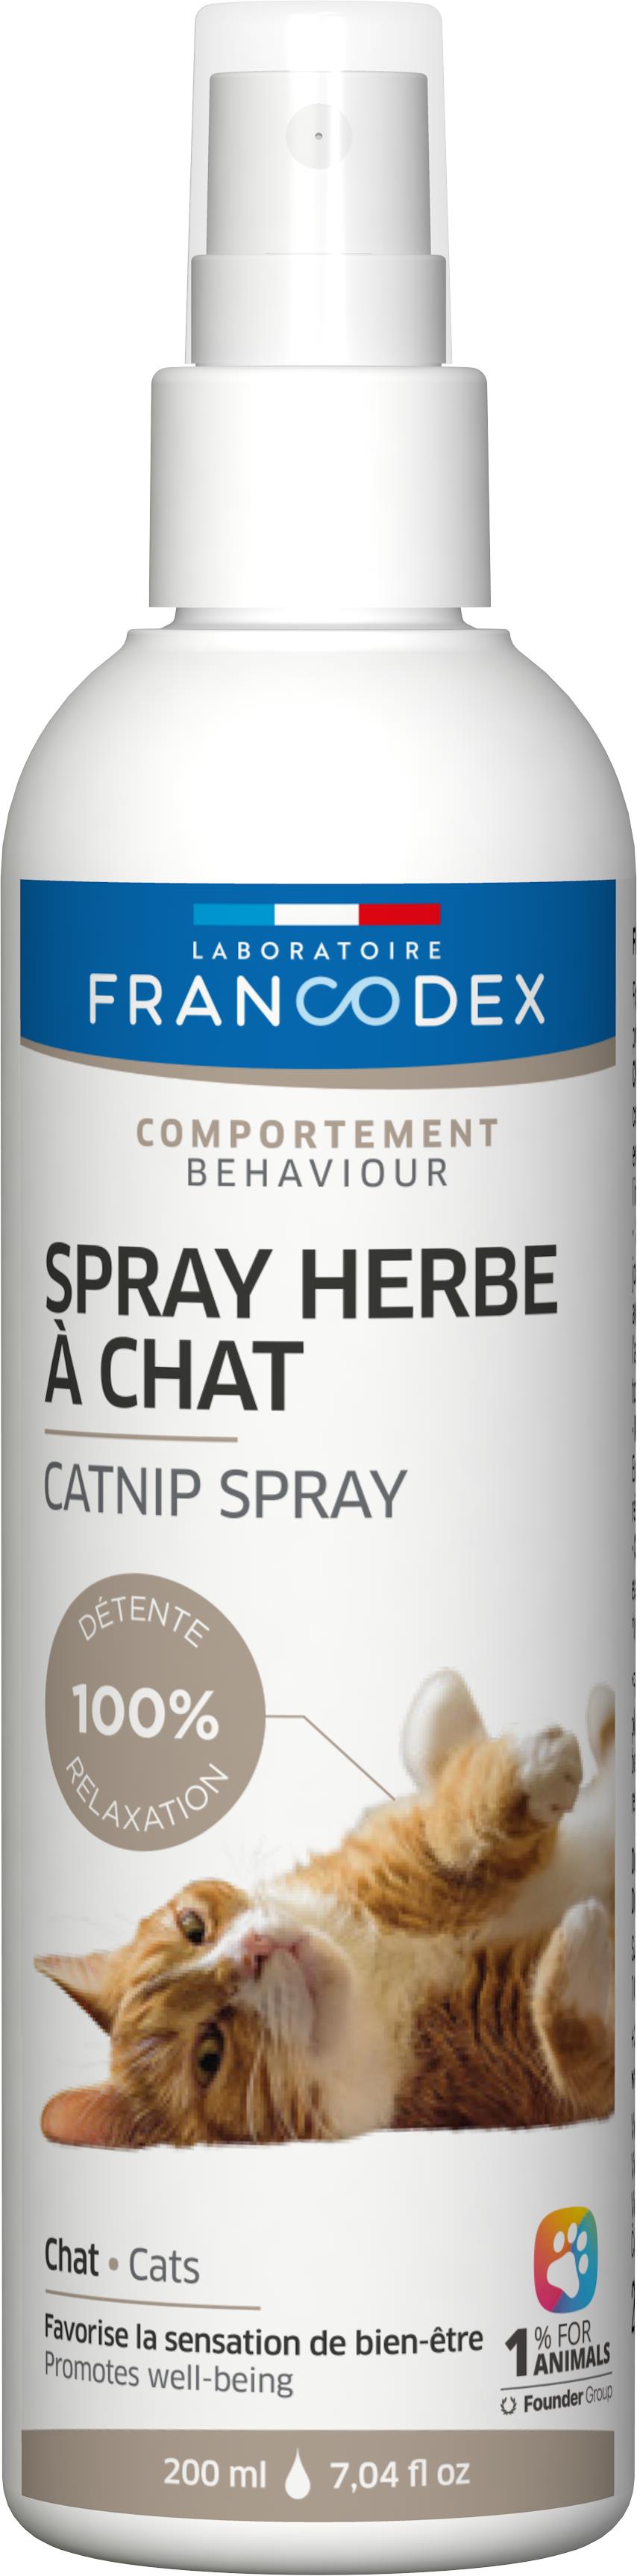 comportement chat – francodex spray herbe à chat – 200 ml